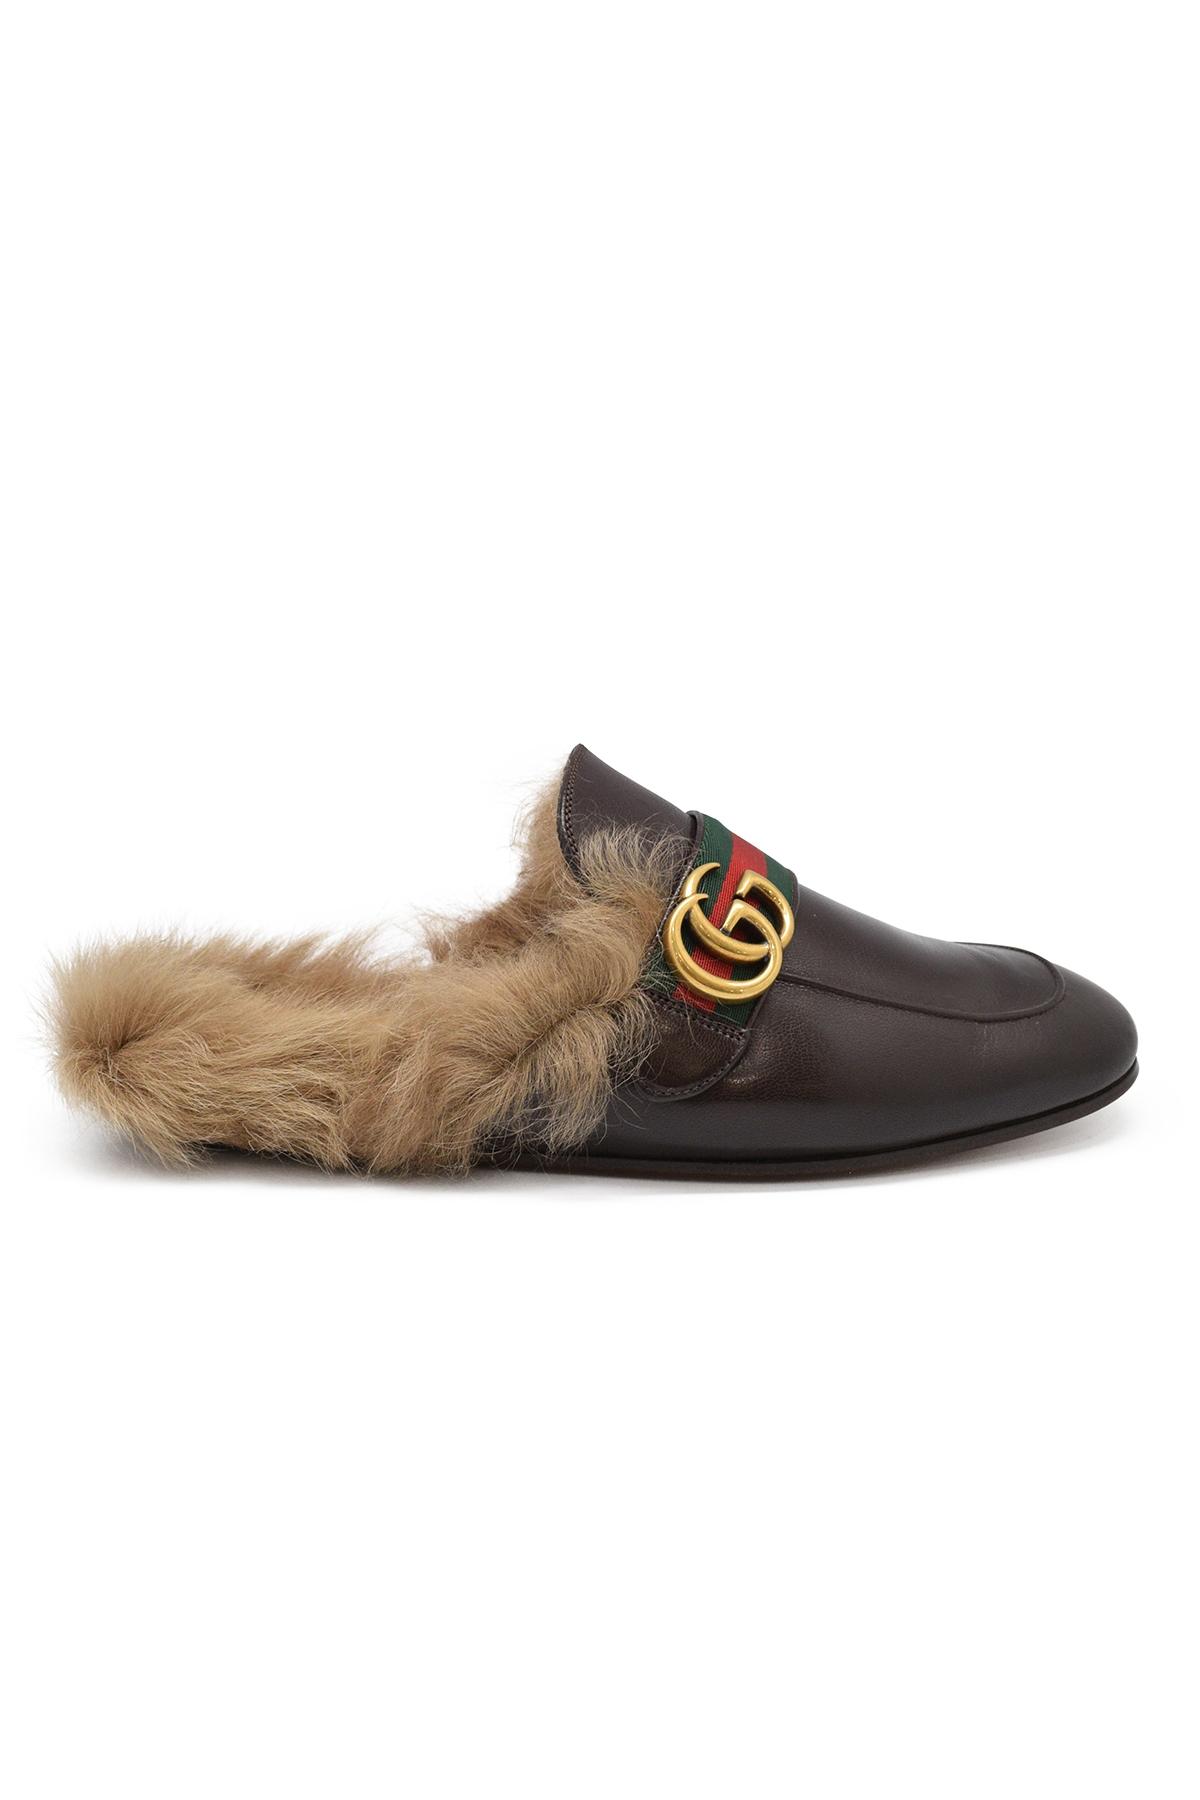 Gucci Princetown Slippers in Brown for Men - Lyst